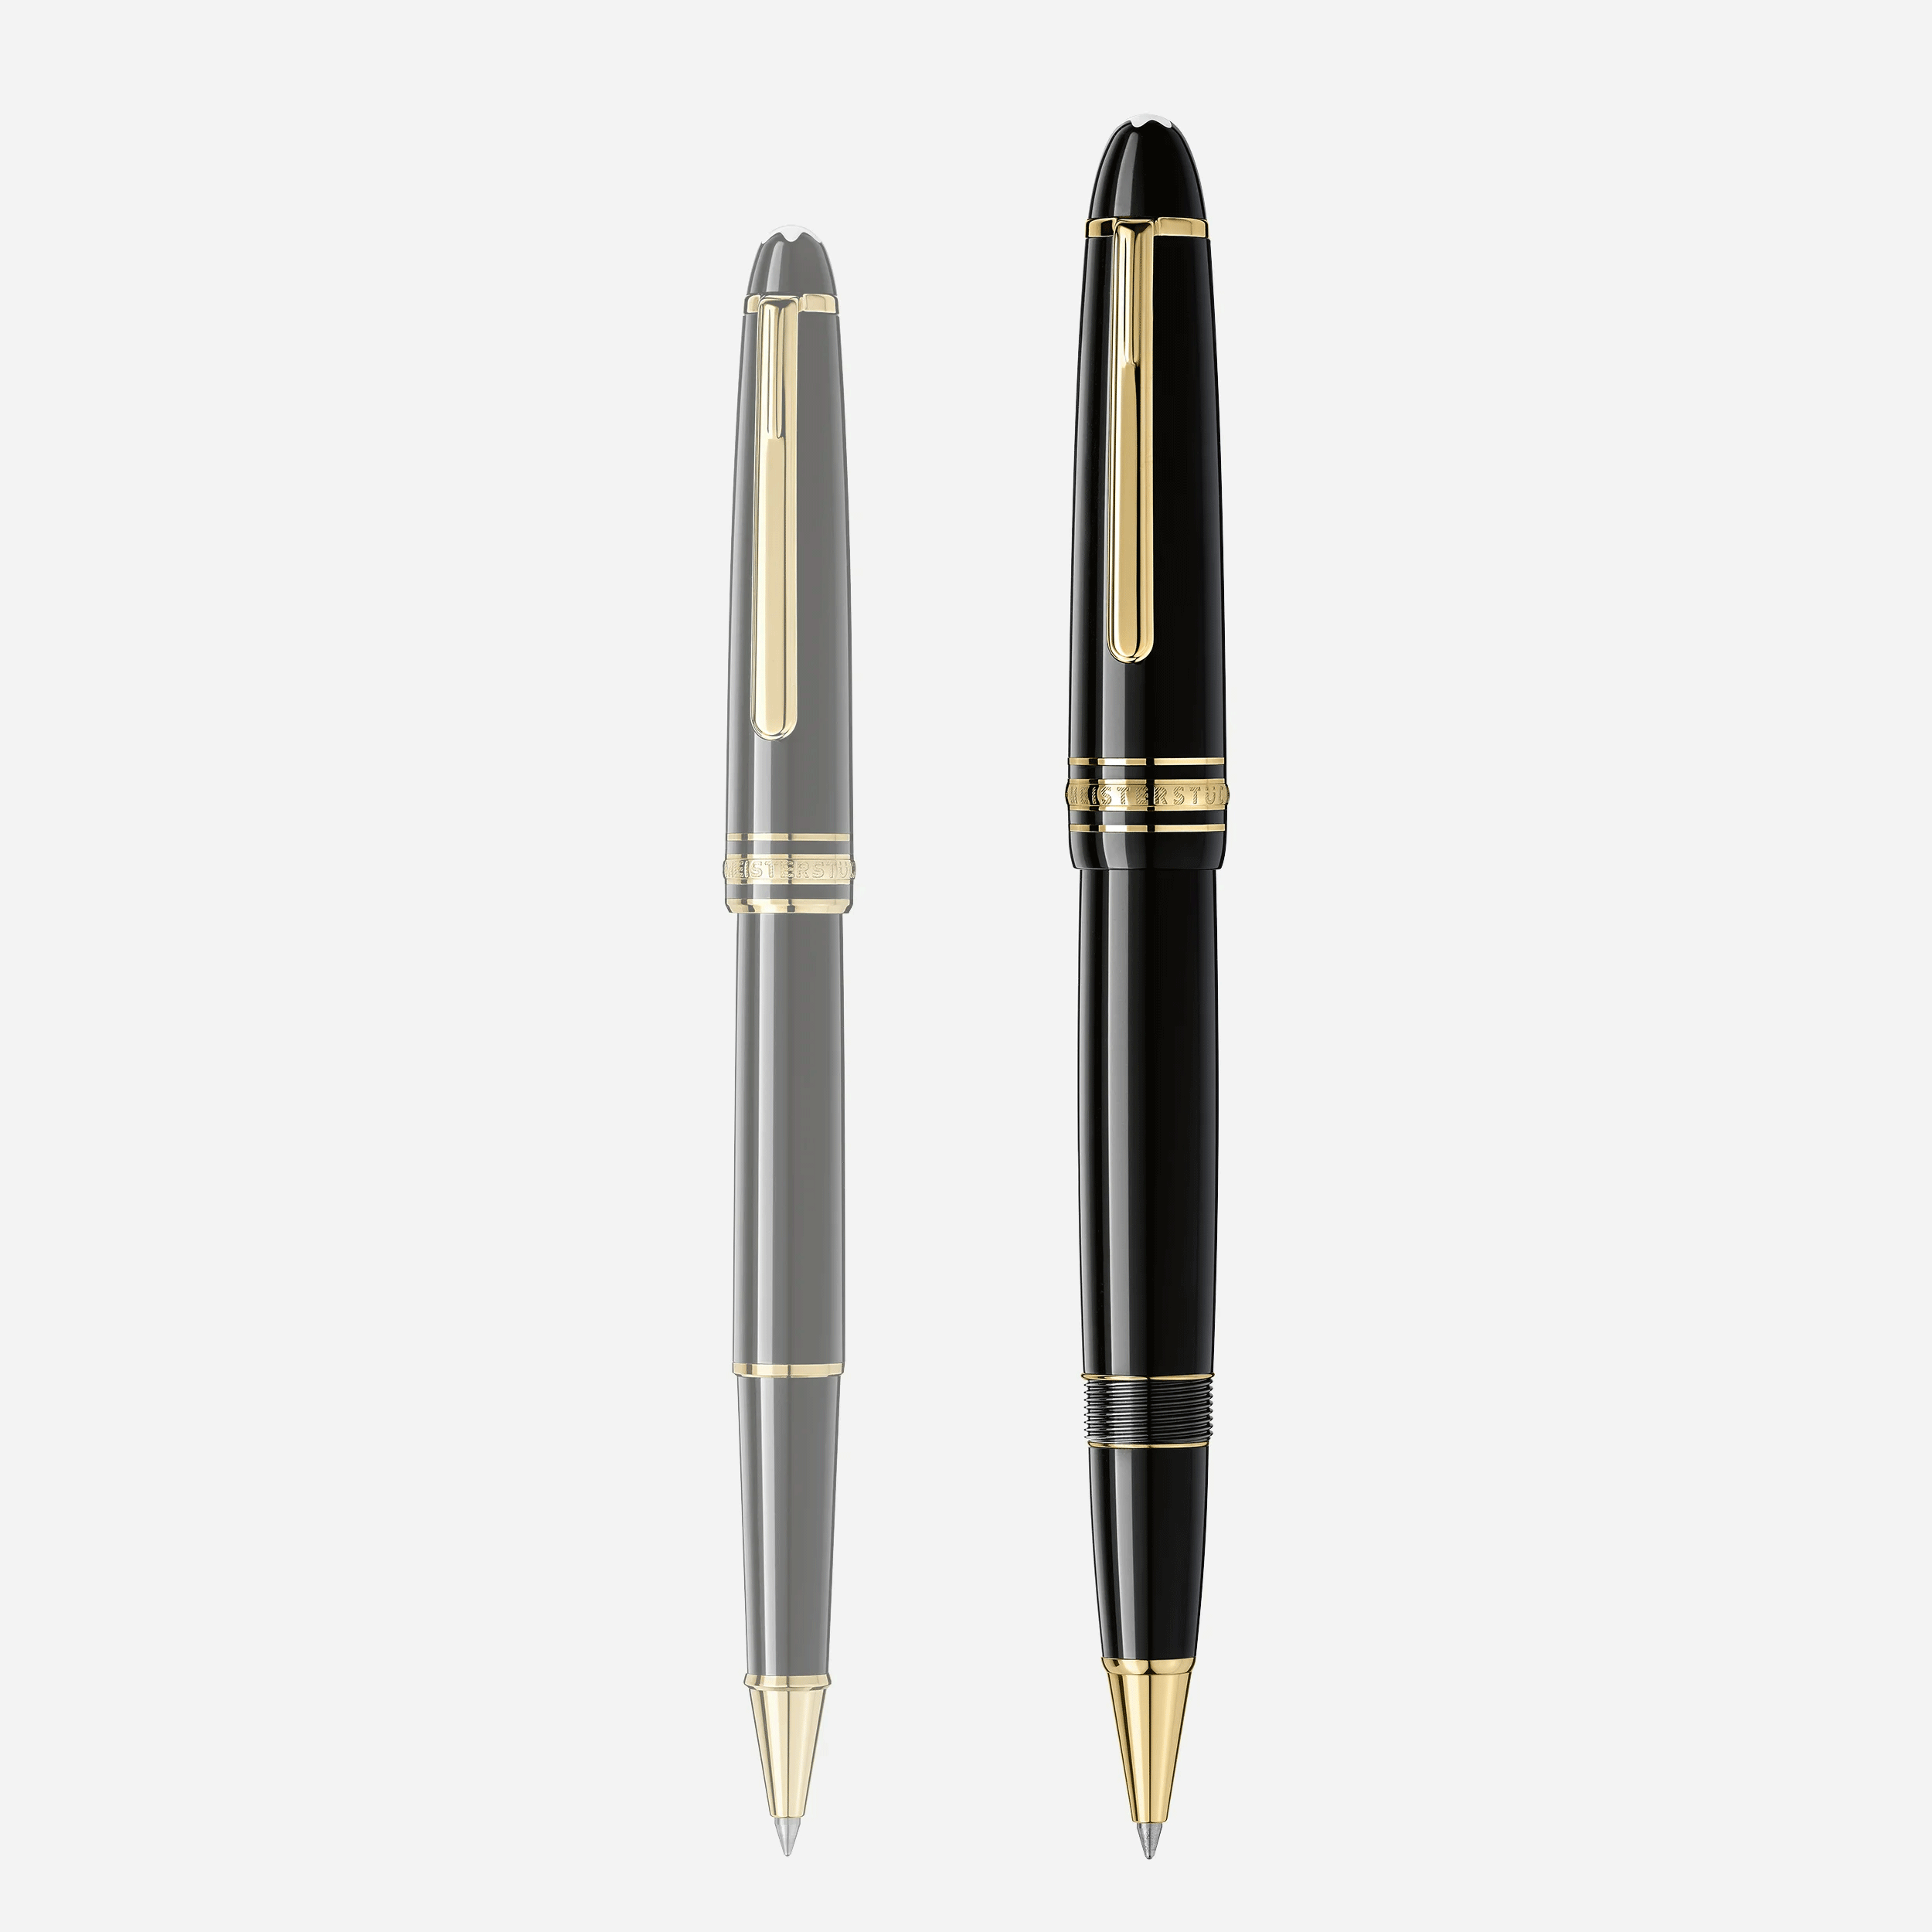 Montblanc Meisterstuck LeGrand Black Gold Rollerball - Pencraft the boutique